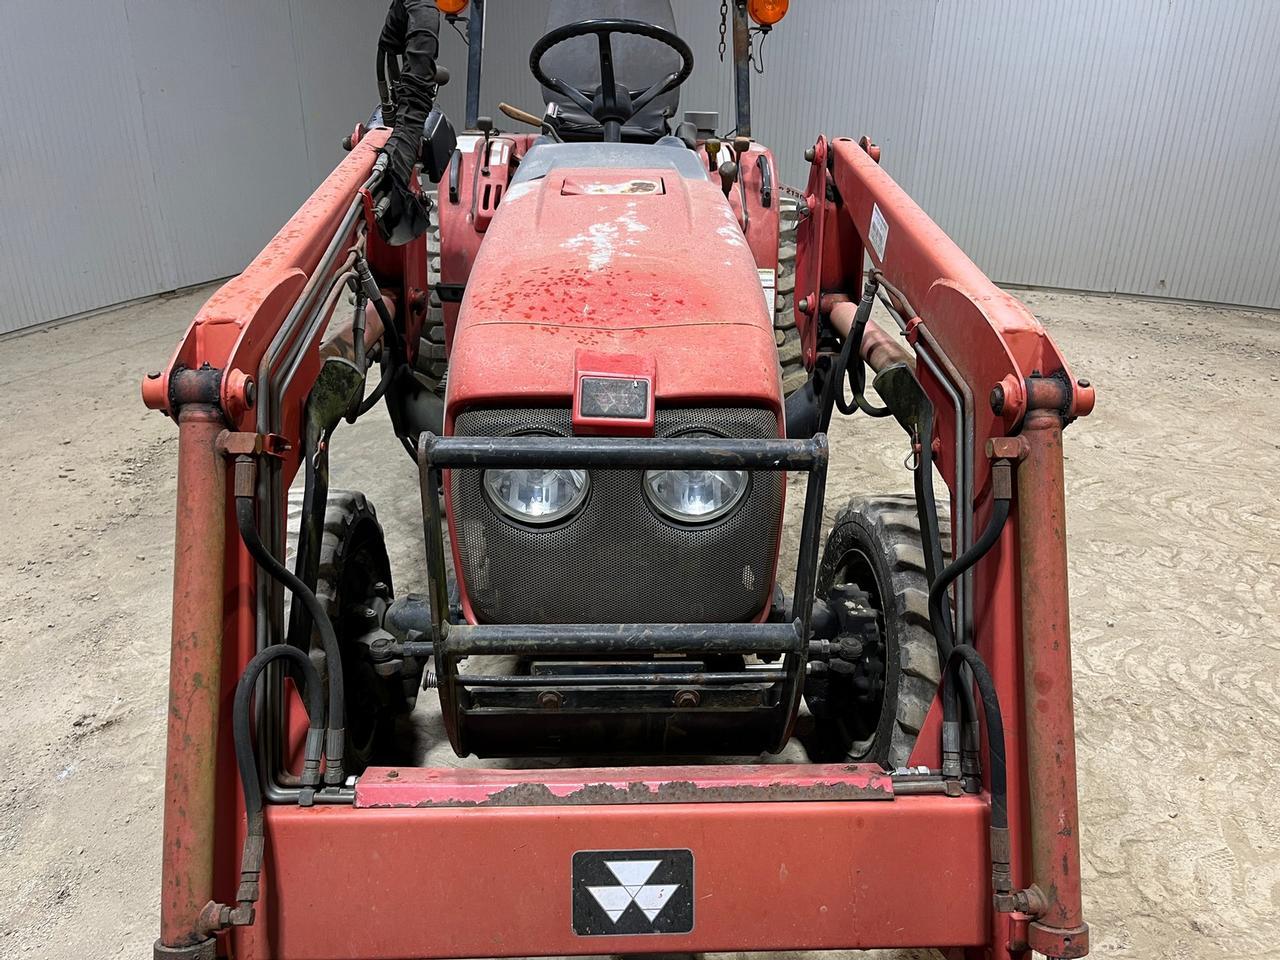 Massey Ferguson 1528 Compact Tractor with Loader